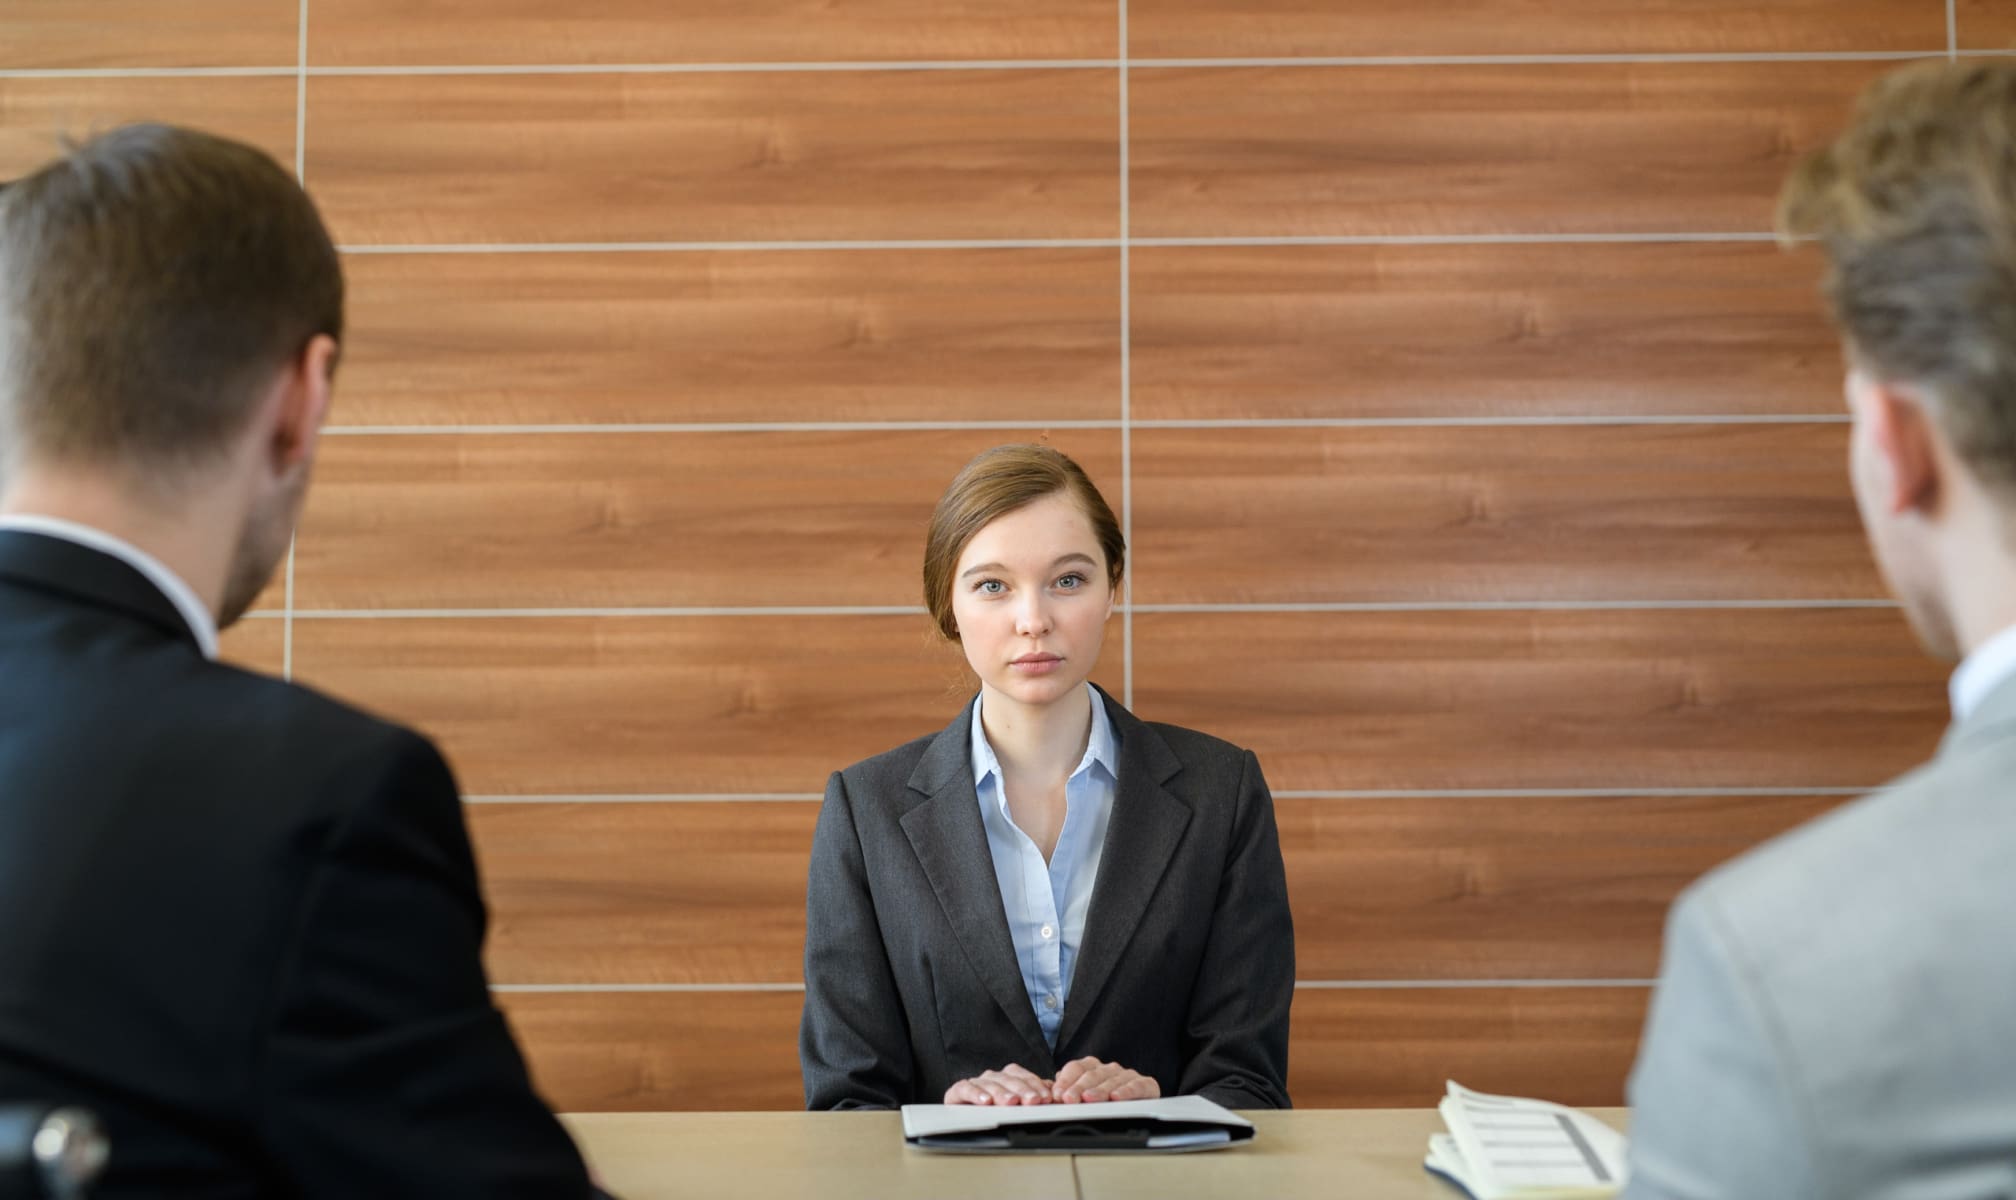 woman looking nervous in tech interview